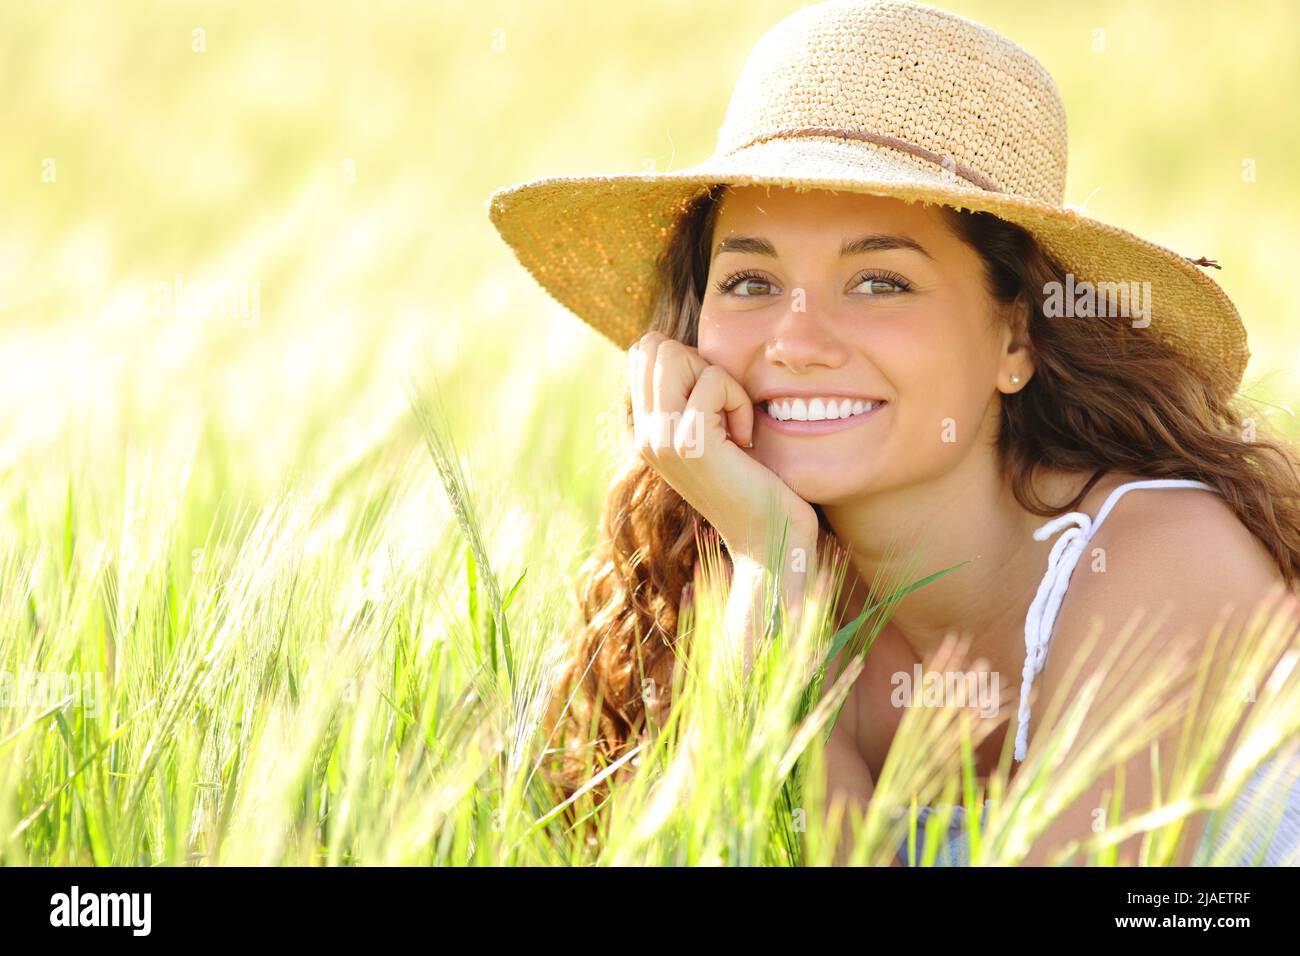 Portrait of a happy woman with white smile sitting in a wheat field looking at camera Stock Photo